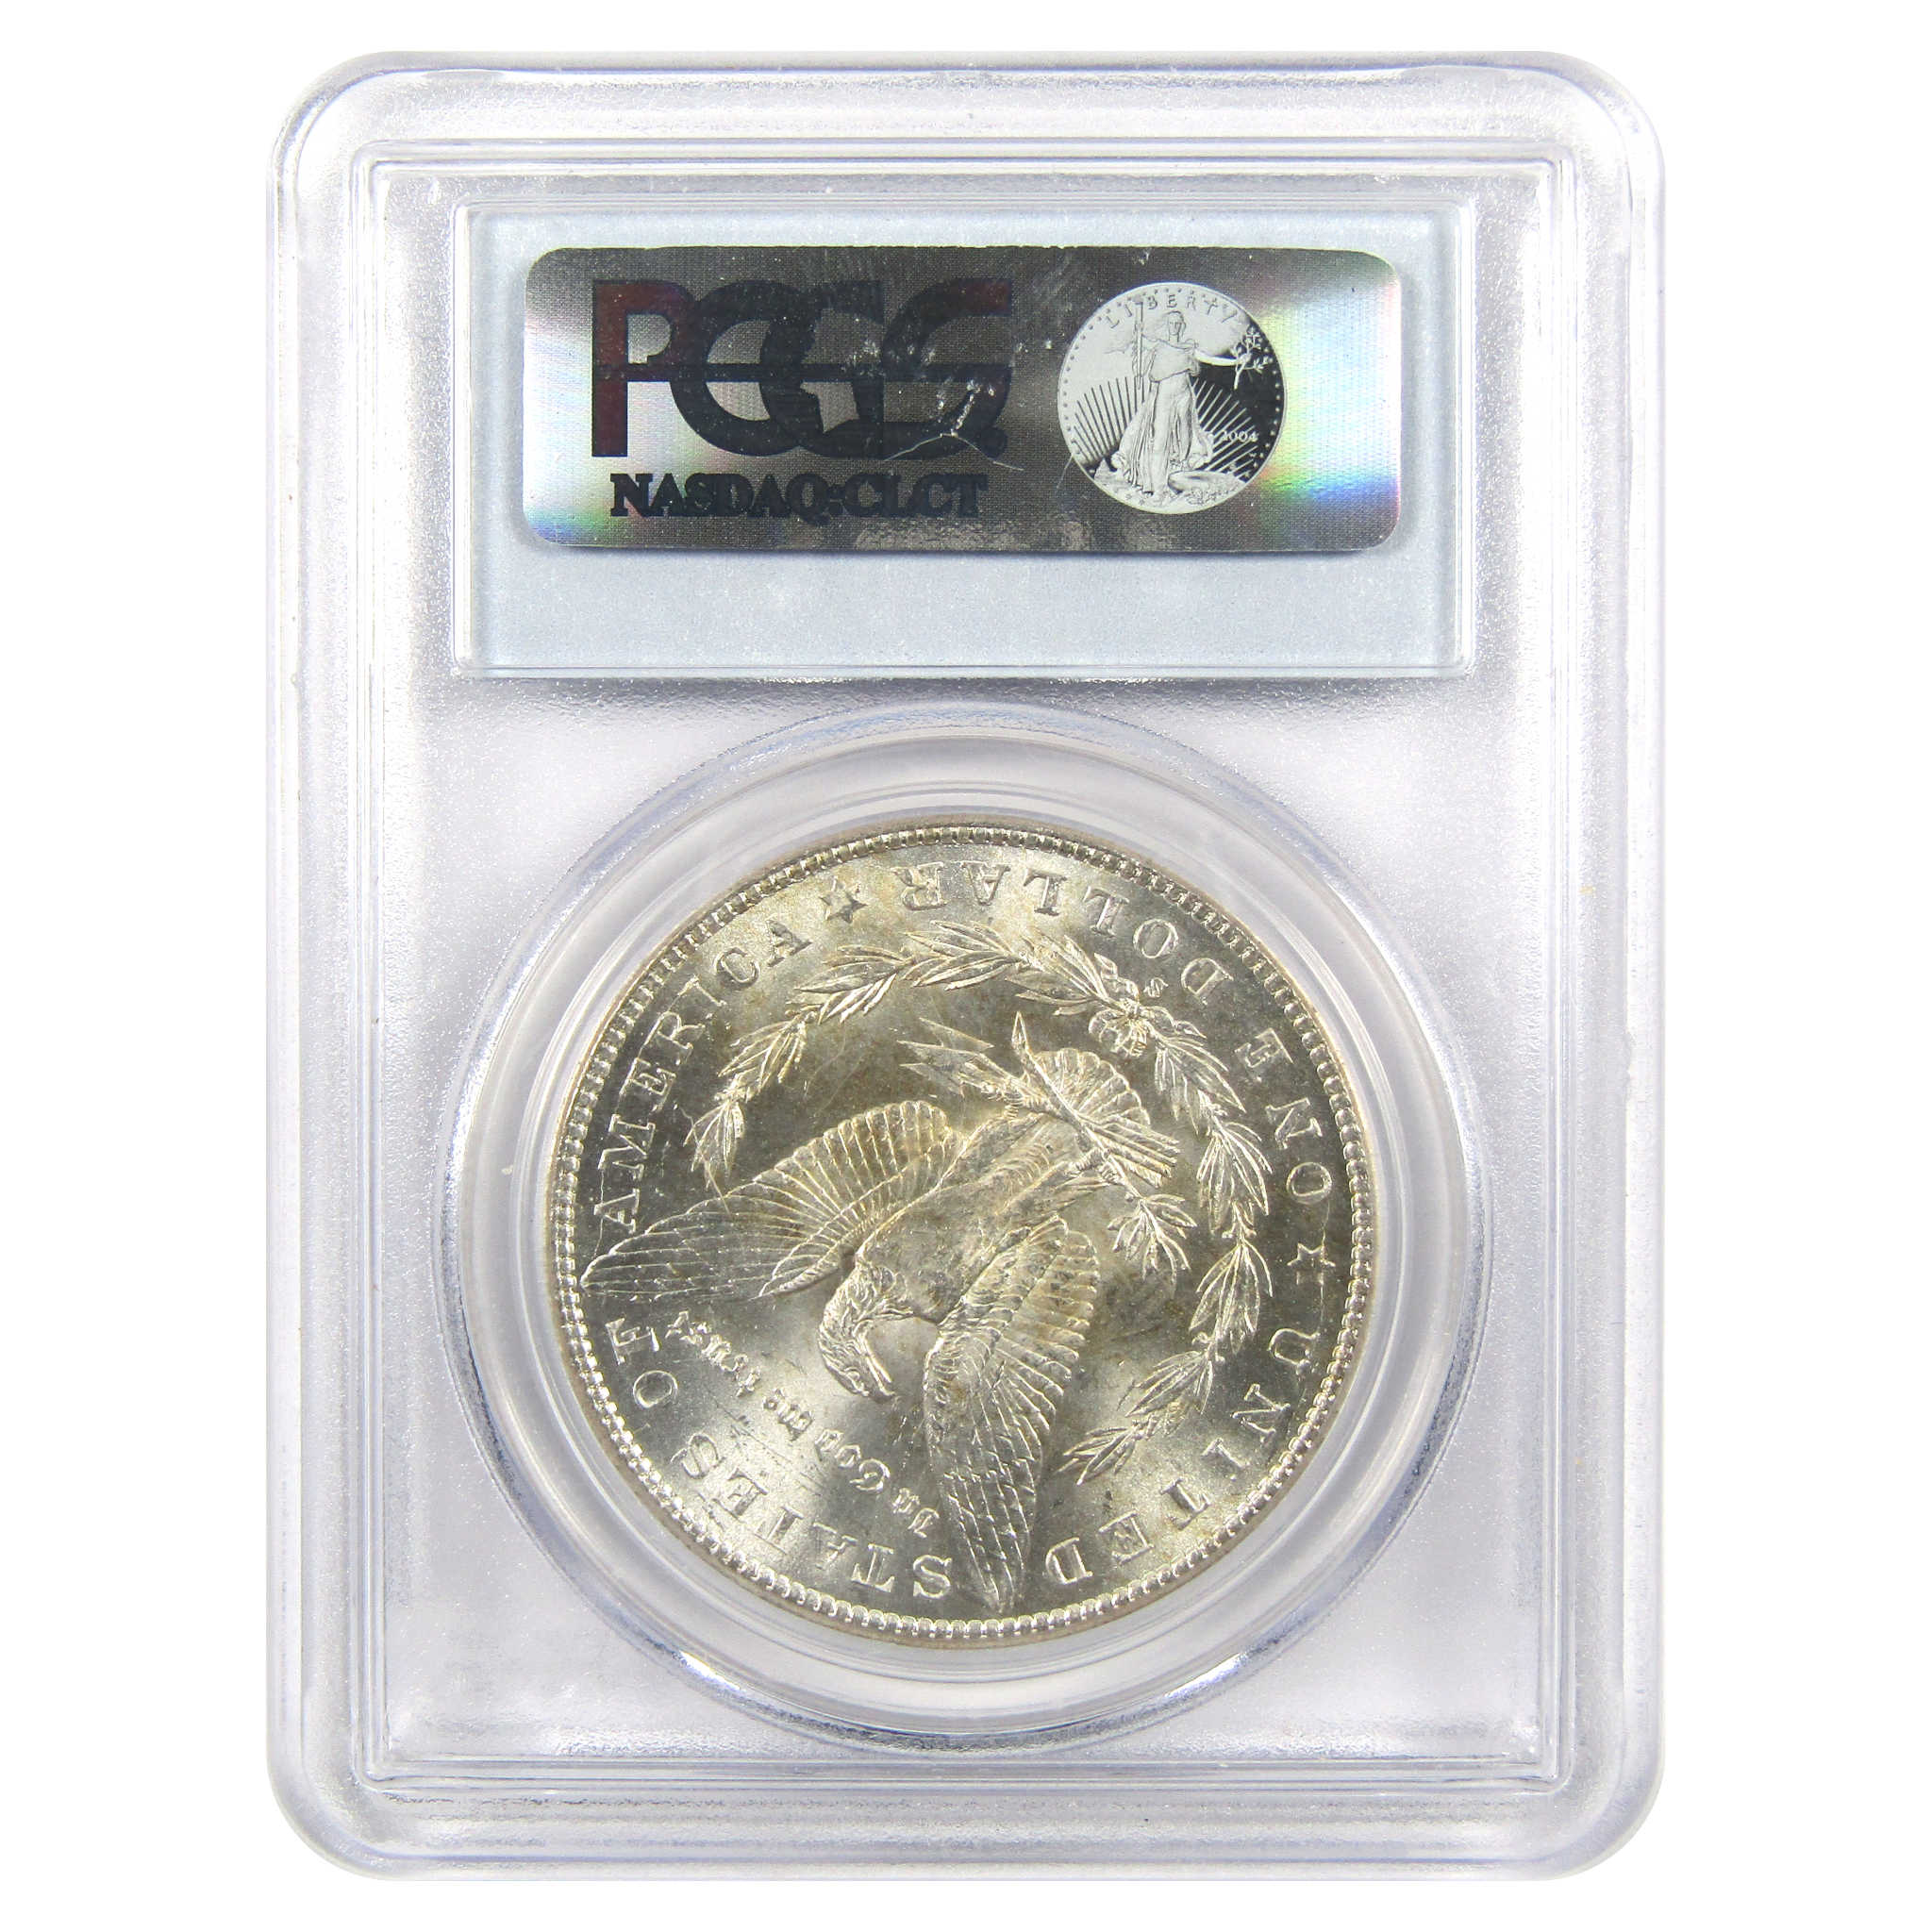 1901 S Morgan Dollar MS 64 PCGS Silver $1 Uncirculated Coin SKU:I11775 - Morgan coin - Morgan silver dollar - Morgan silver dollar for sale - Profile Coins &amp; Collectibles